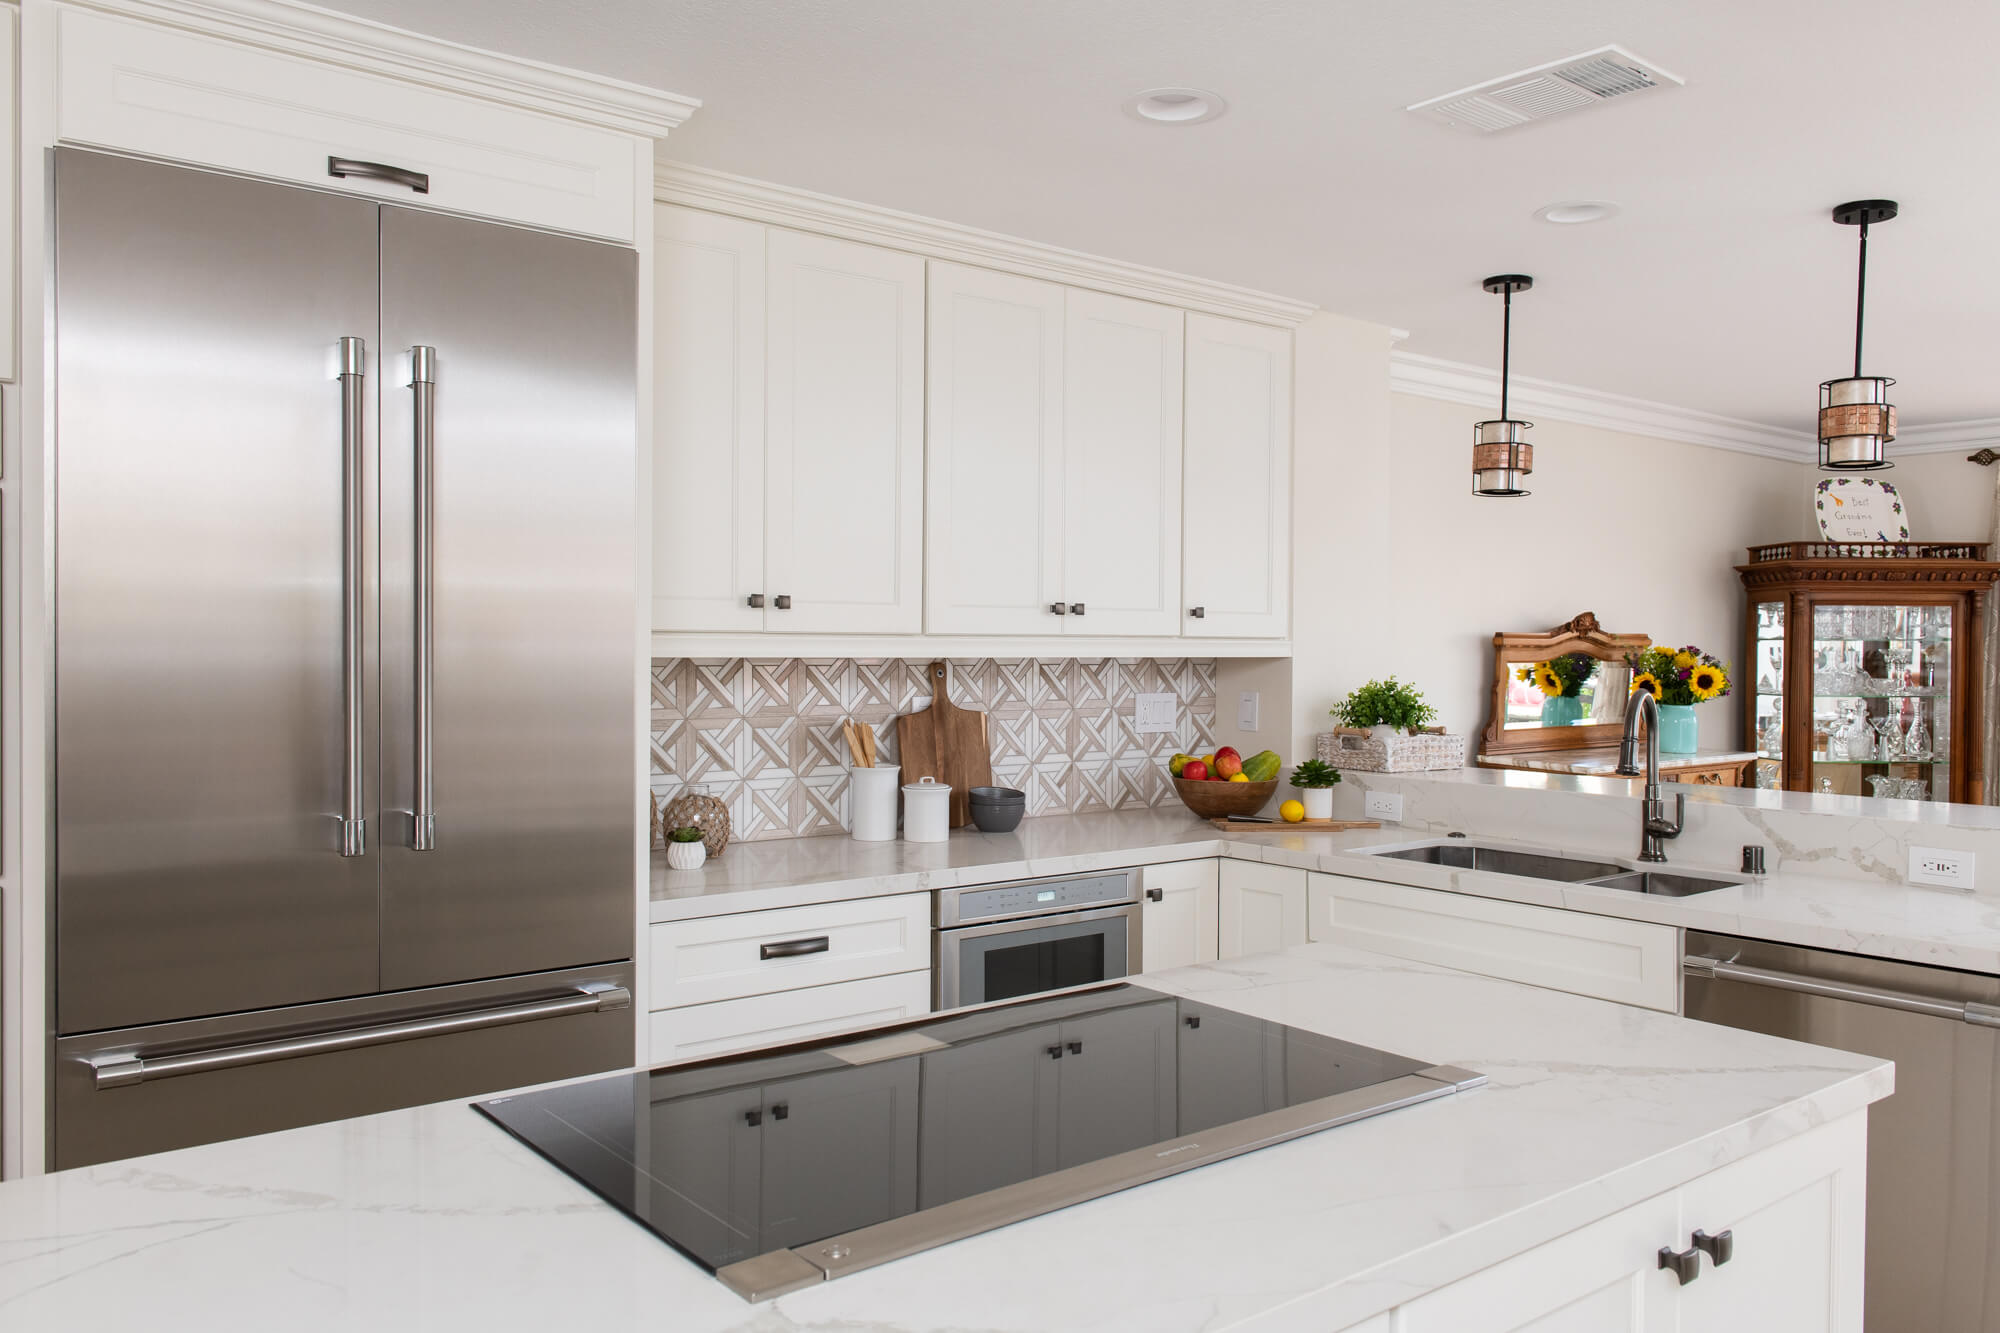 Newport Beach Kitchen Remodel With White Cabinetry and Countertops